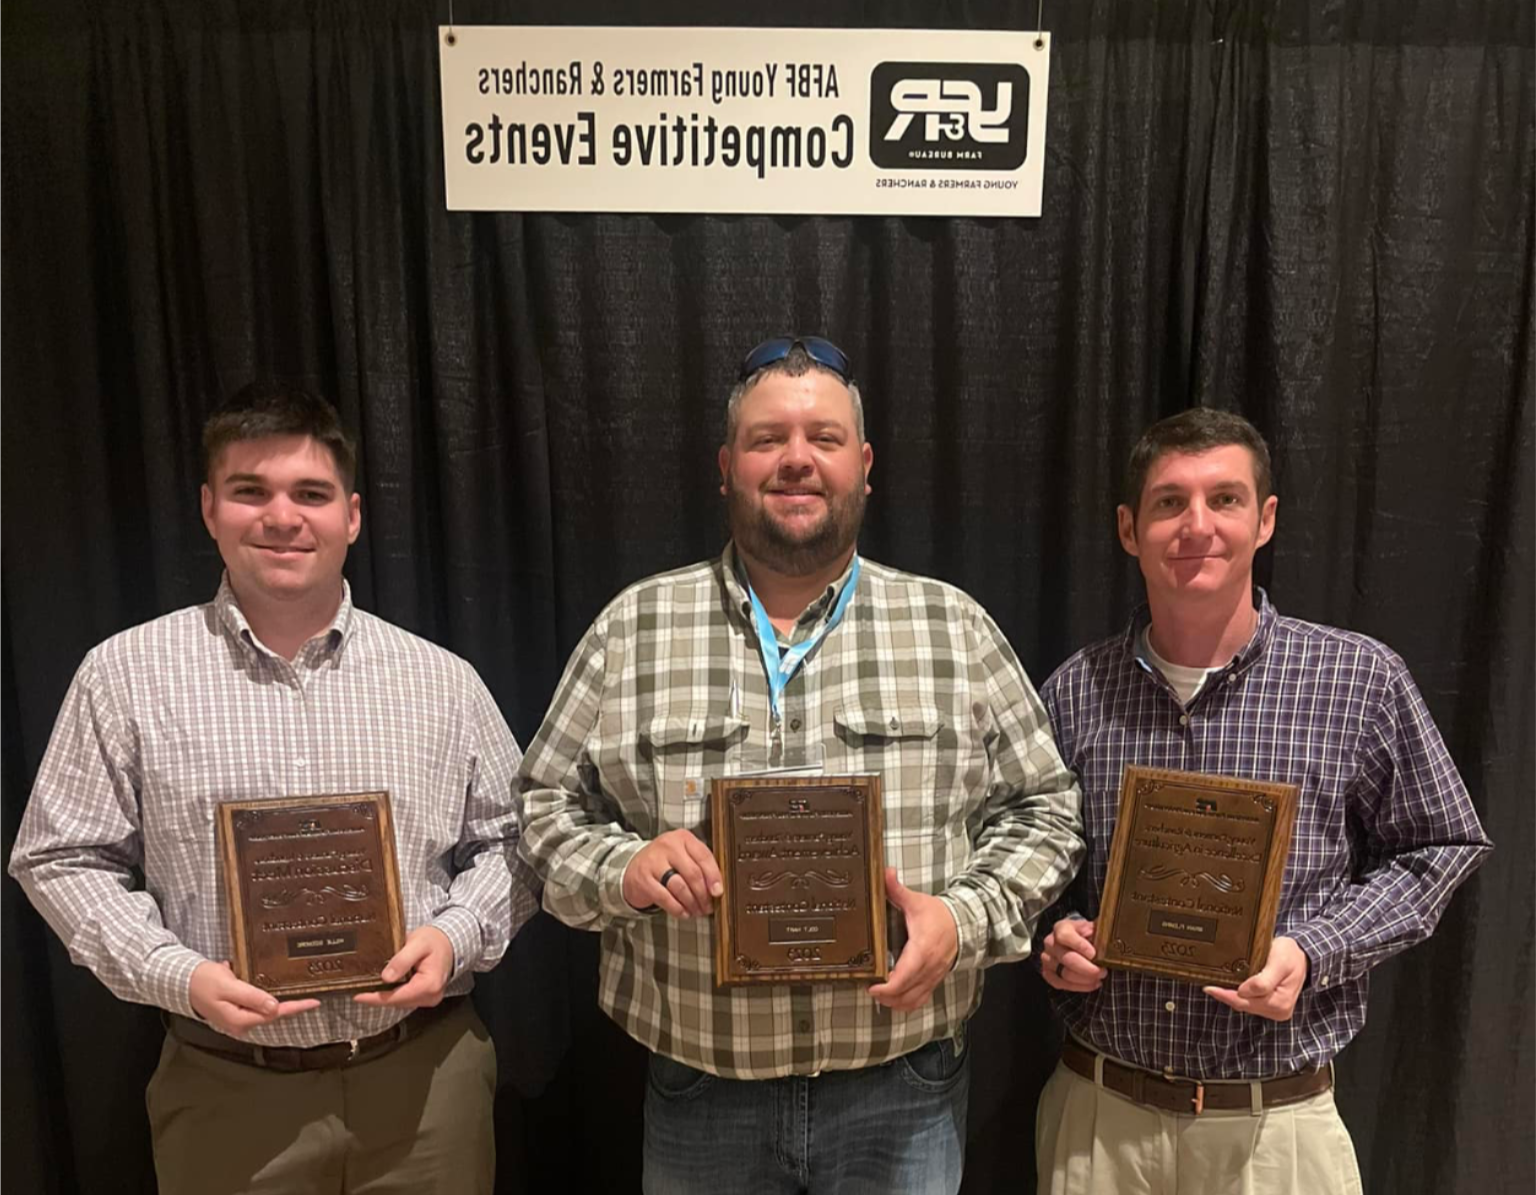 GFB is proud to have received the AFBF Award of Excellence in four different categories--advocacy, engagement & outreach, leadership & business development, and coalitions & partnerships.